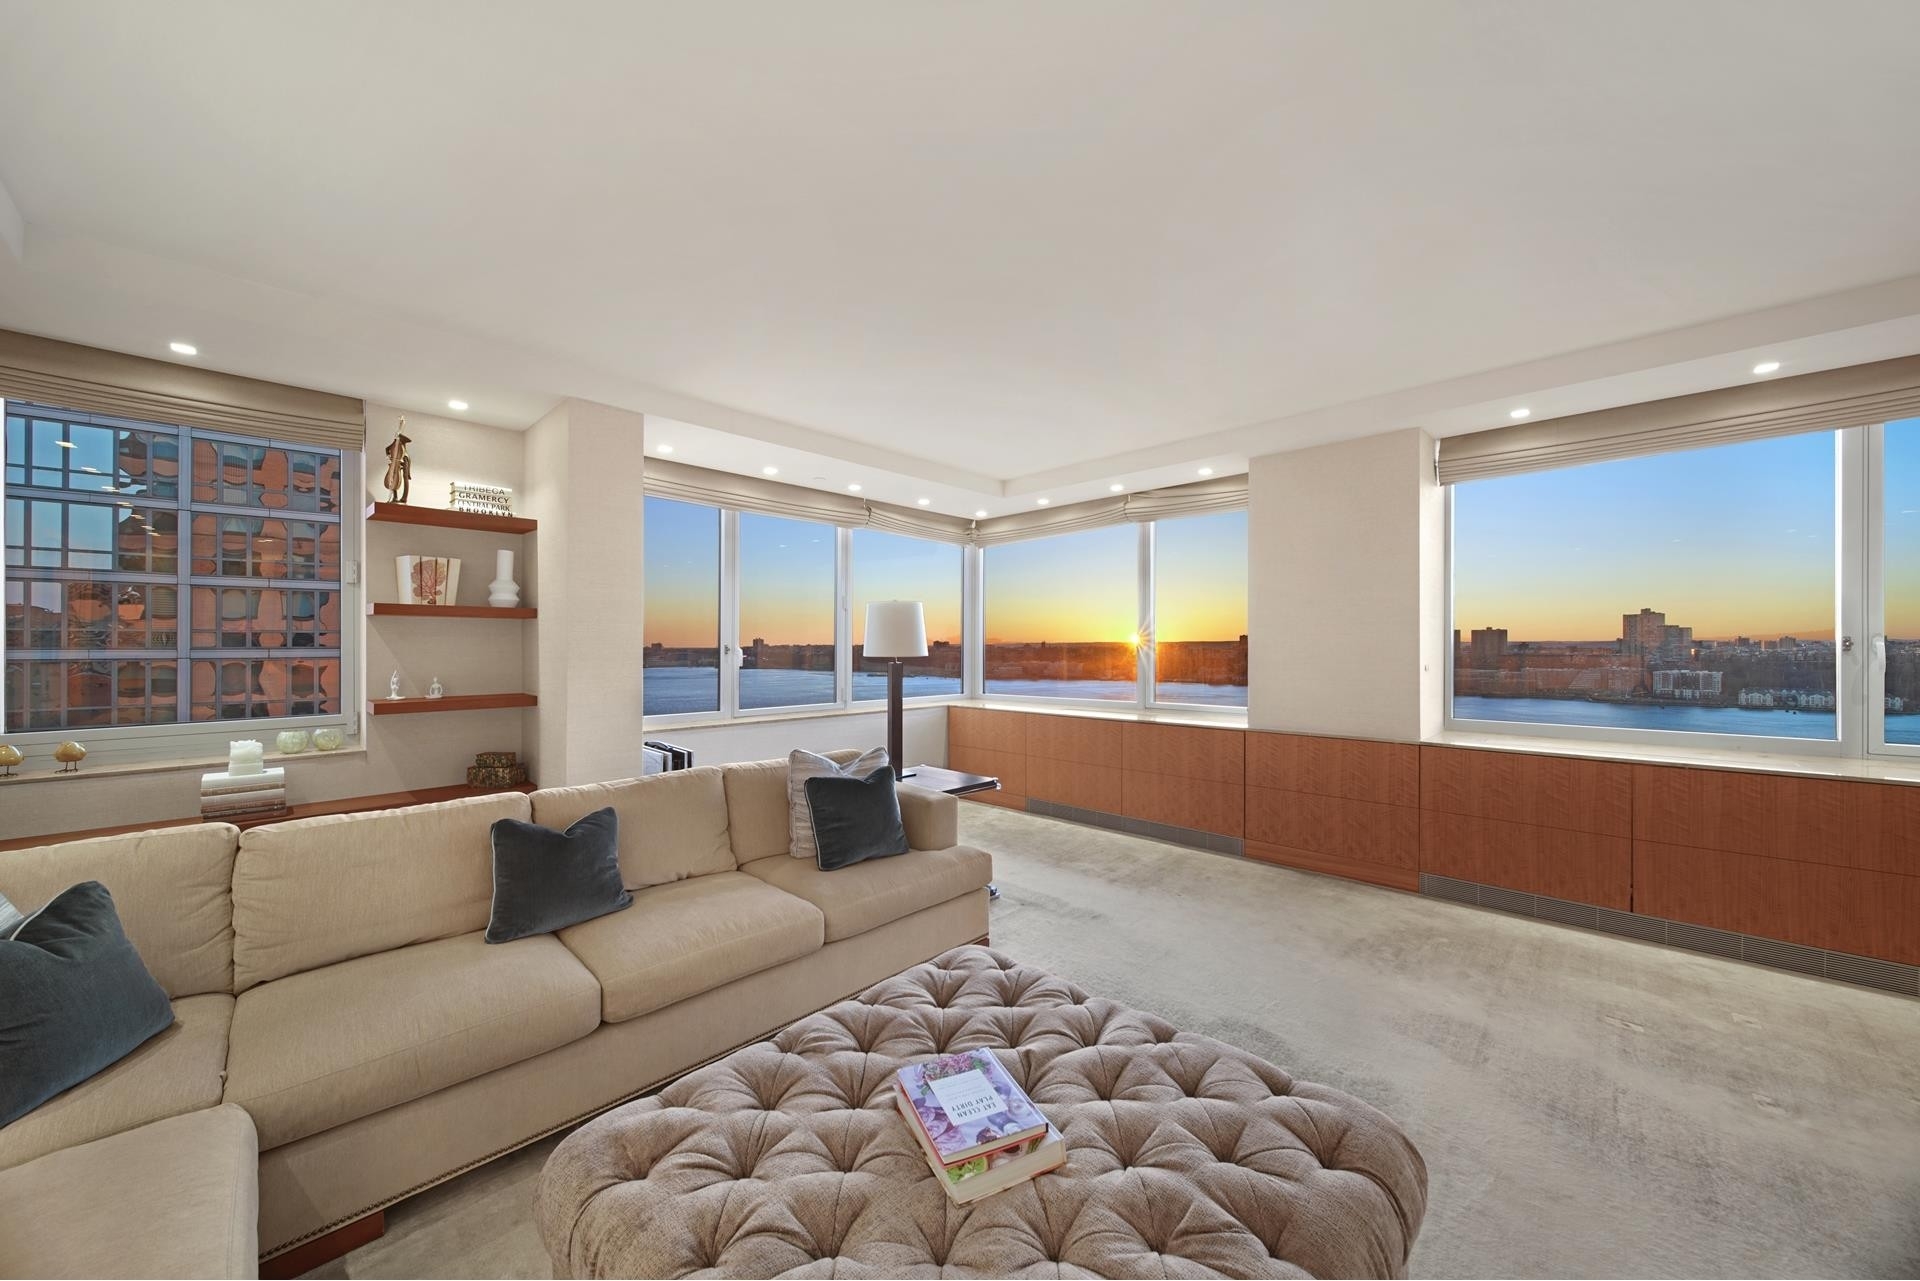 14. Condominiums for Sale at The Avery, 100 RIVERSIDE BLVD, 26THFLOOR Lincoln Square, New York, NY 10069